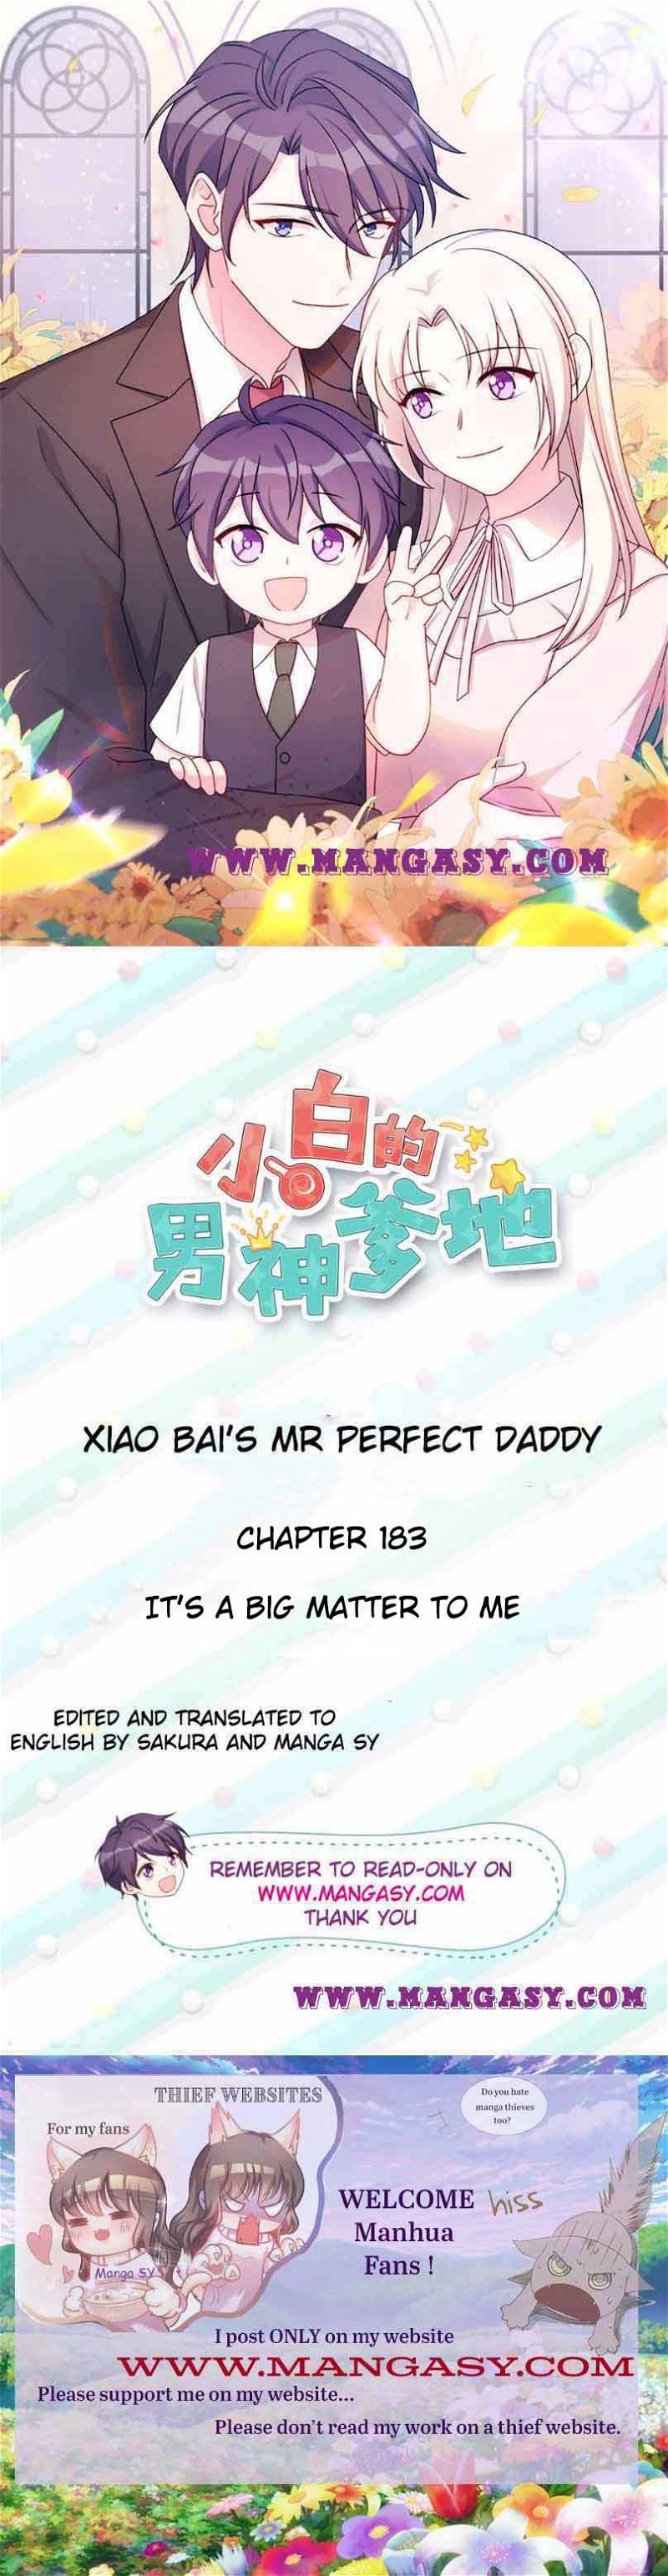 Xiao Bai’s father is a wonderful person Chapter 183 - Page 0